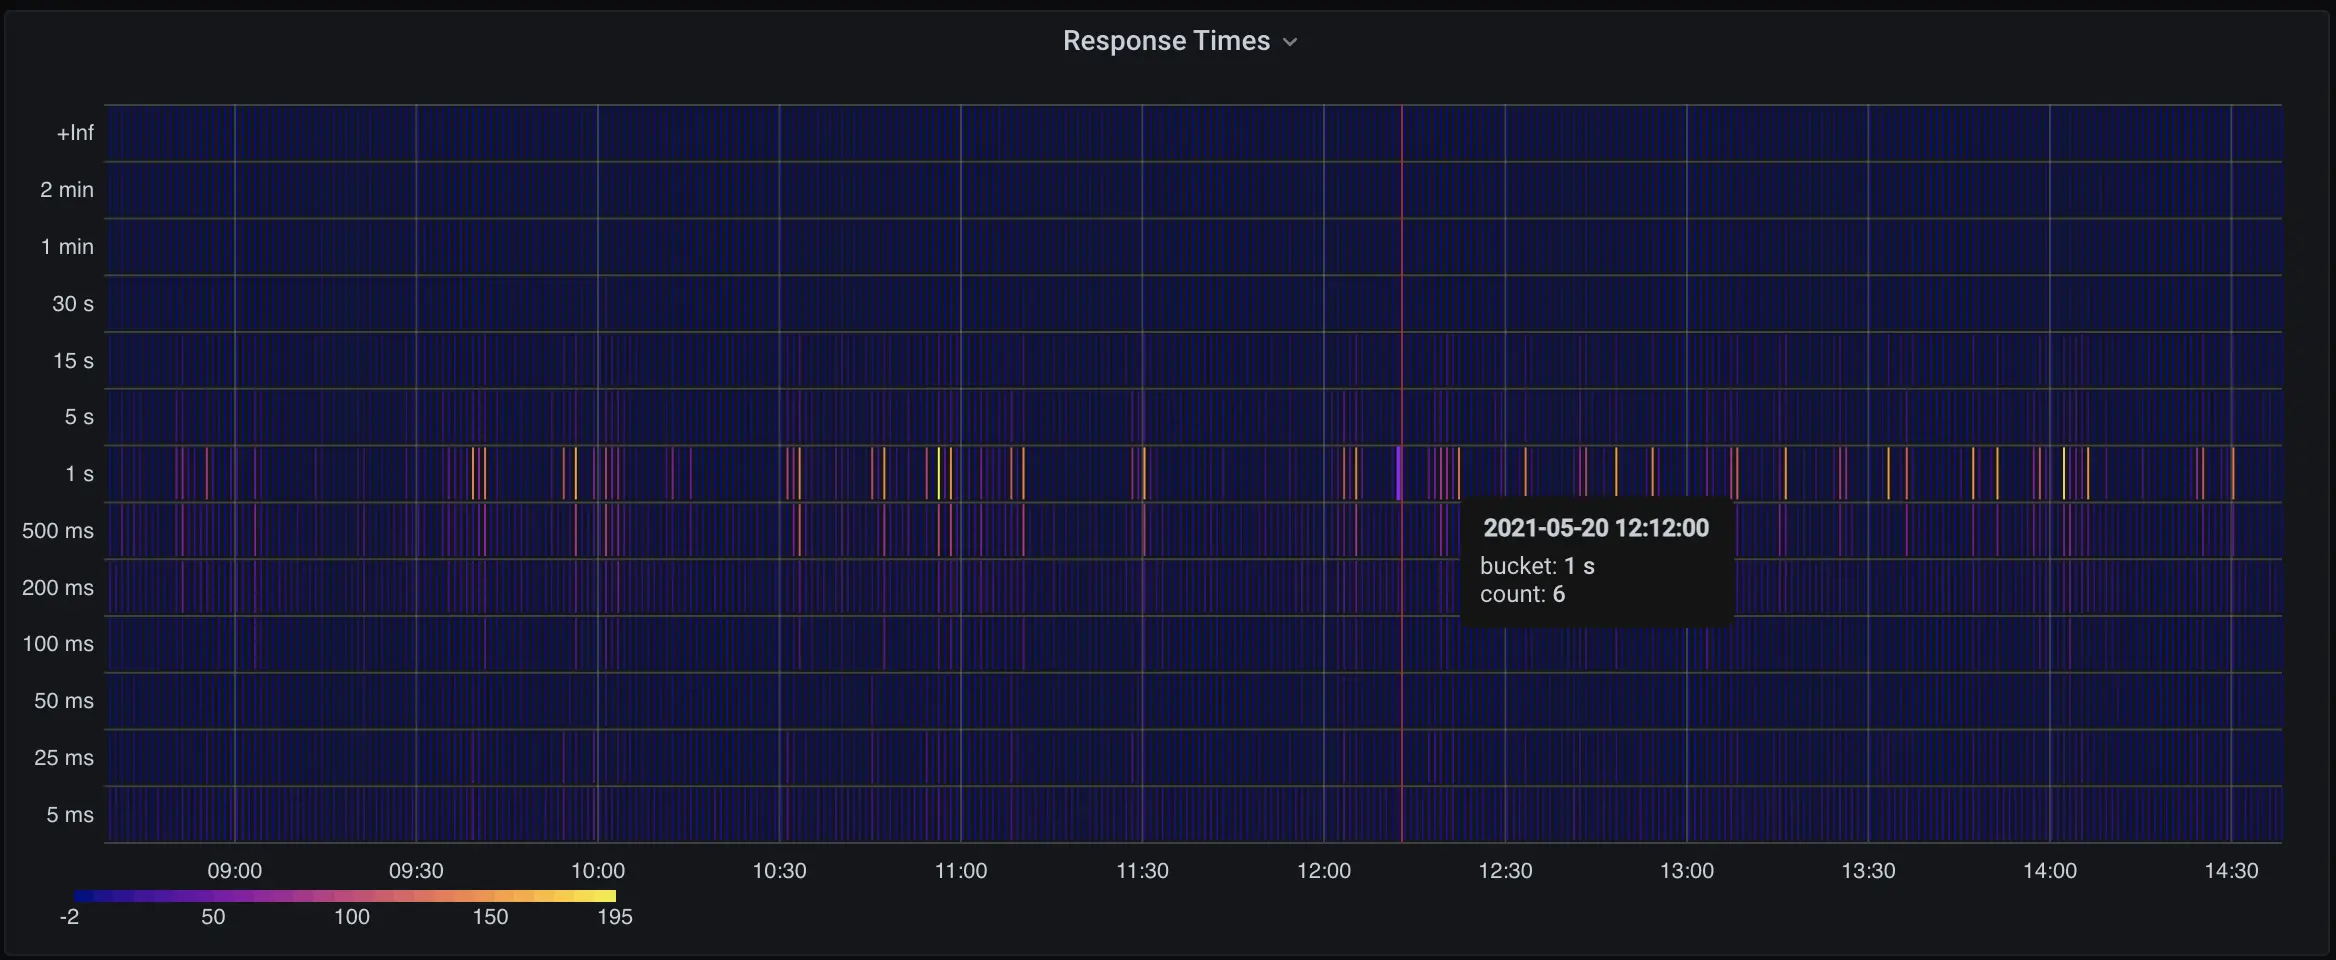 A heat map of response times